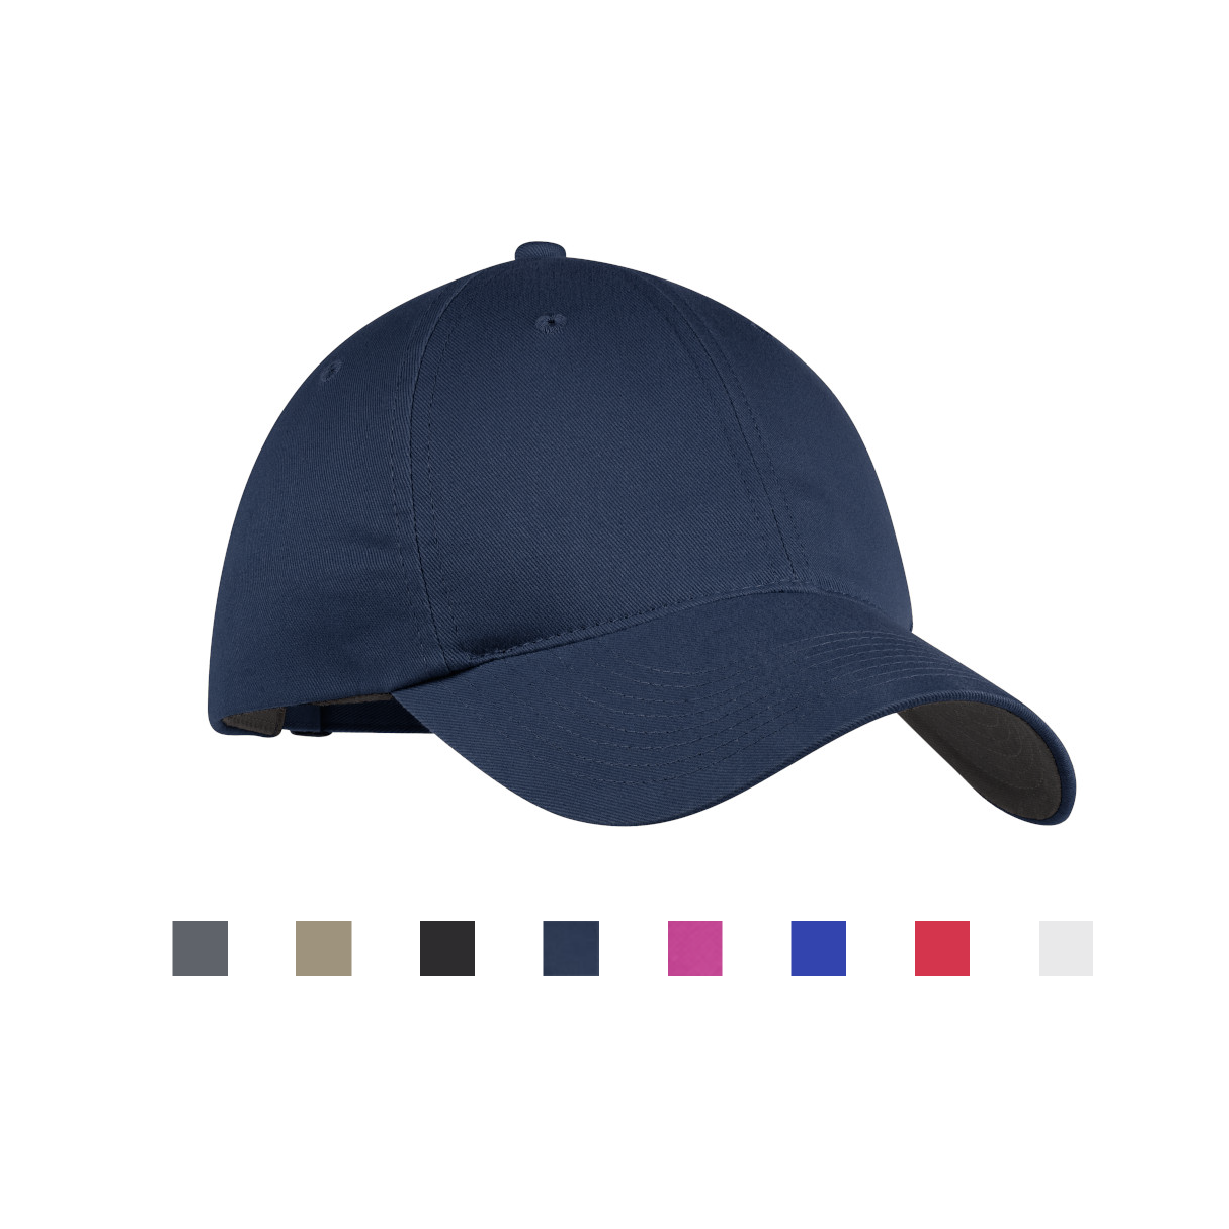 Nike Unstructured Cotton/Poly Twill Cap